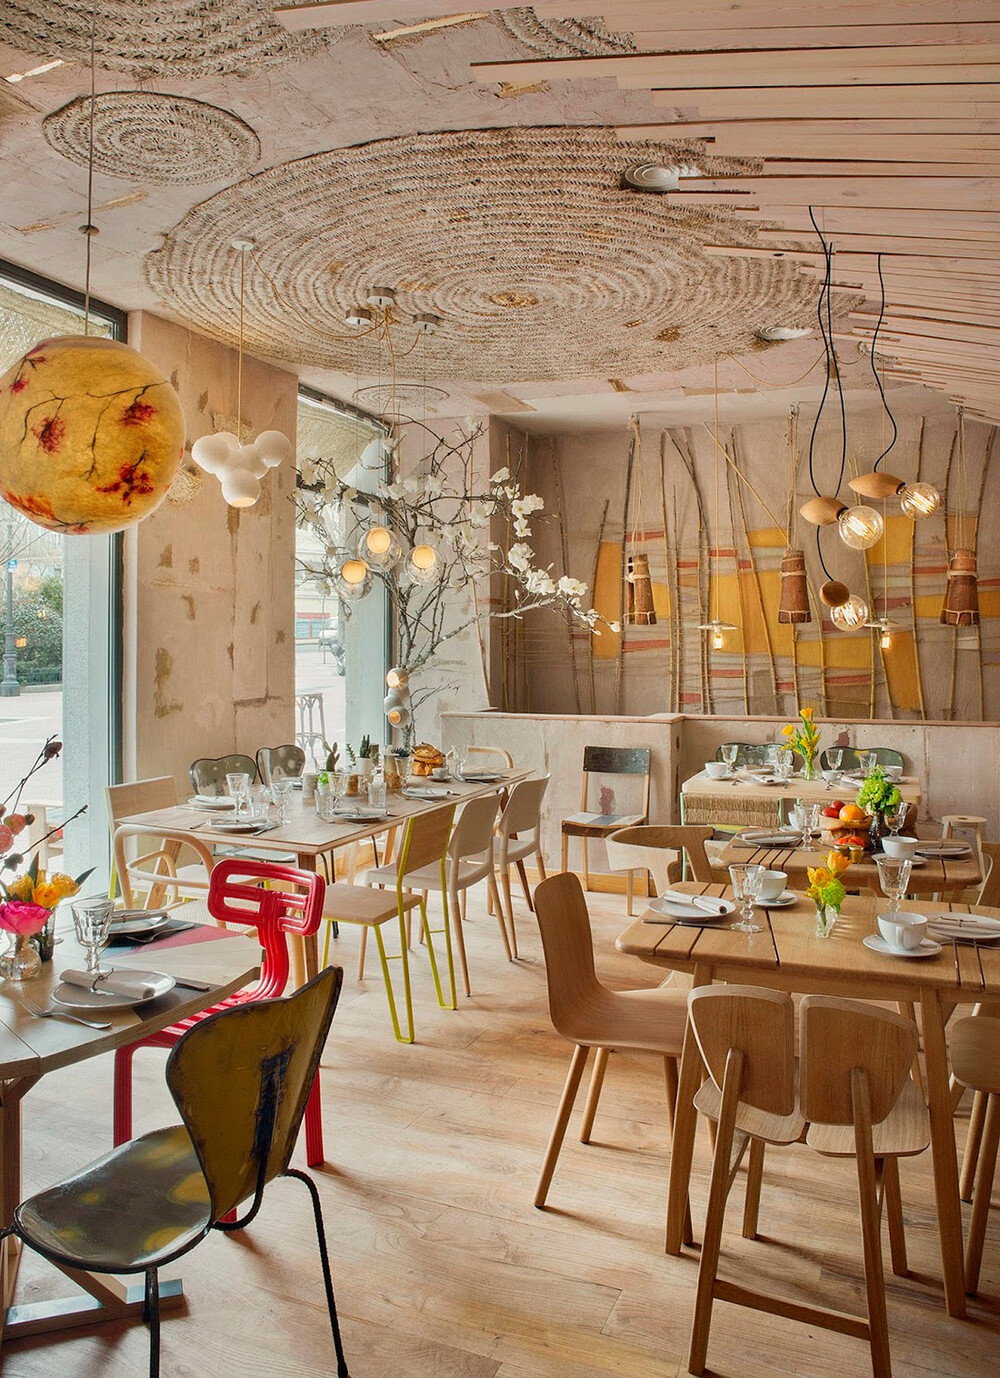 Mama Campo restaurant eclectic design with decors and pastel shades - www.homeworlddesign. com (8)